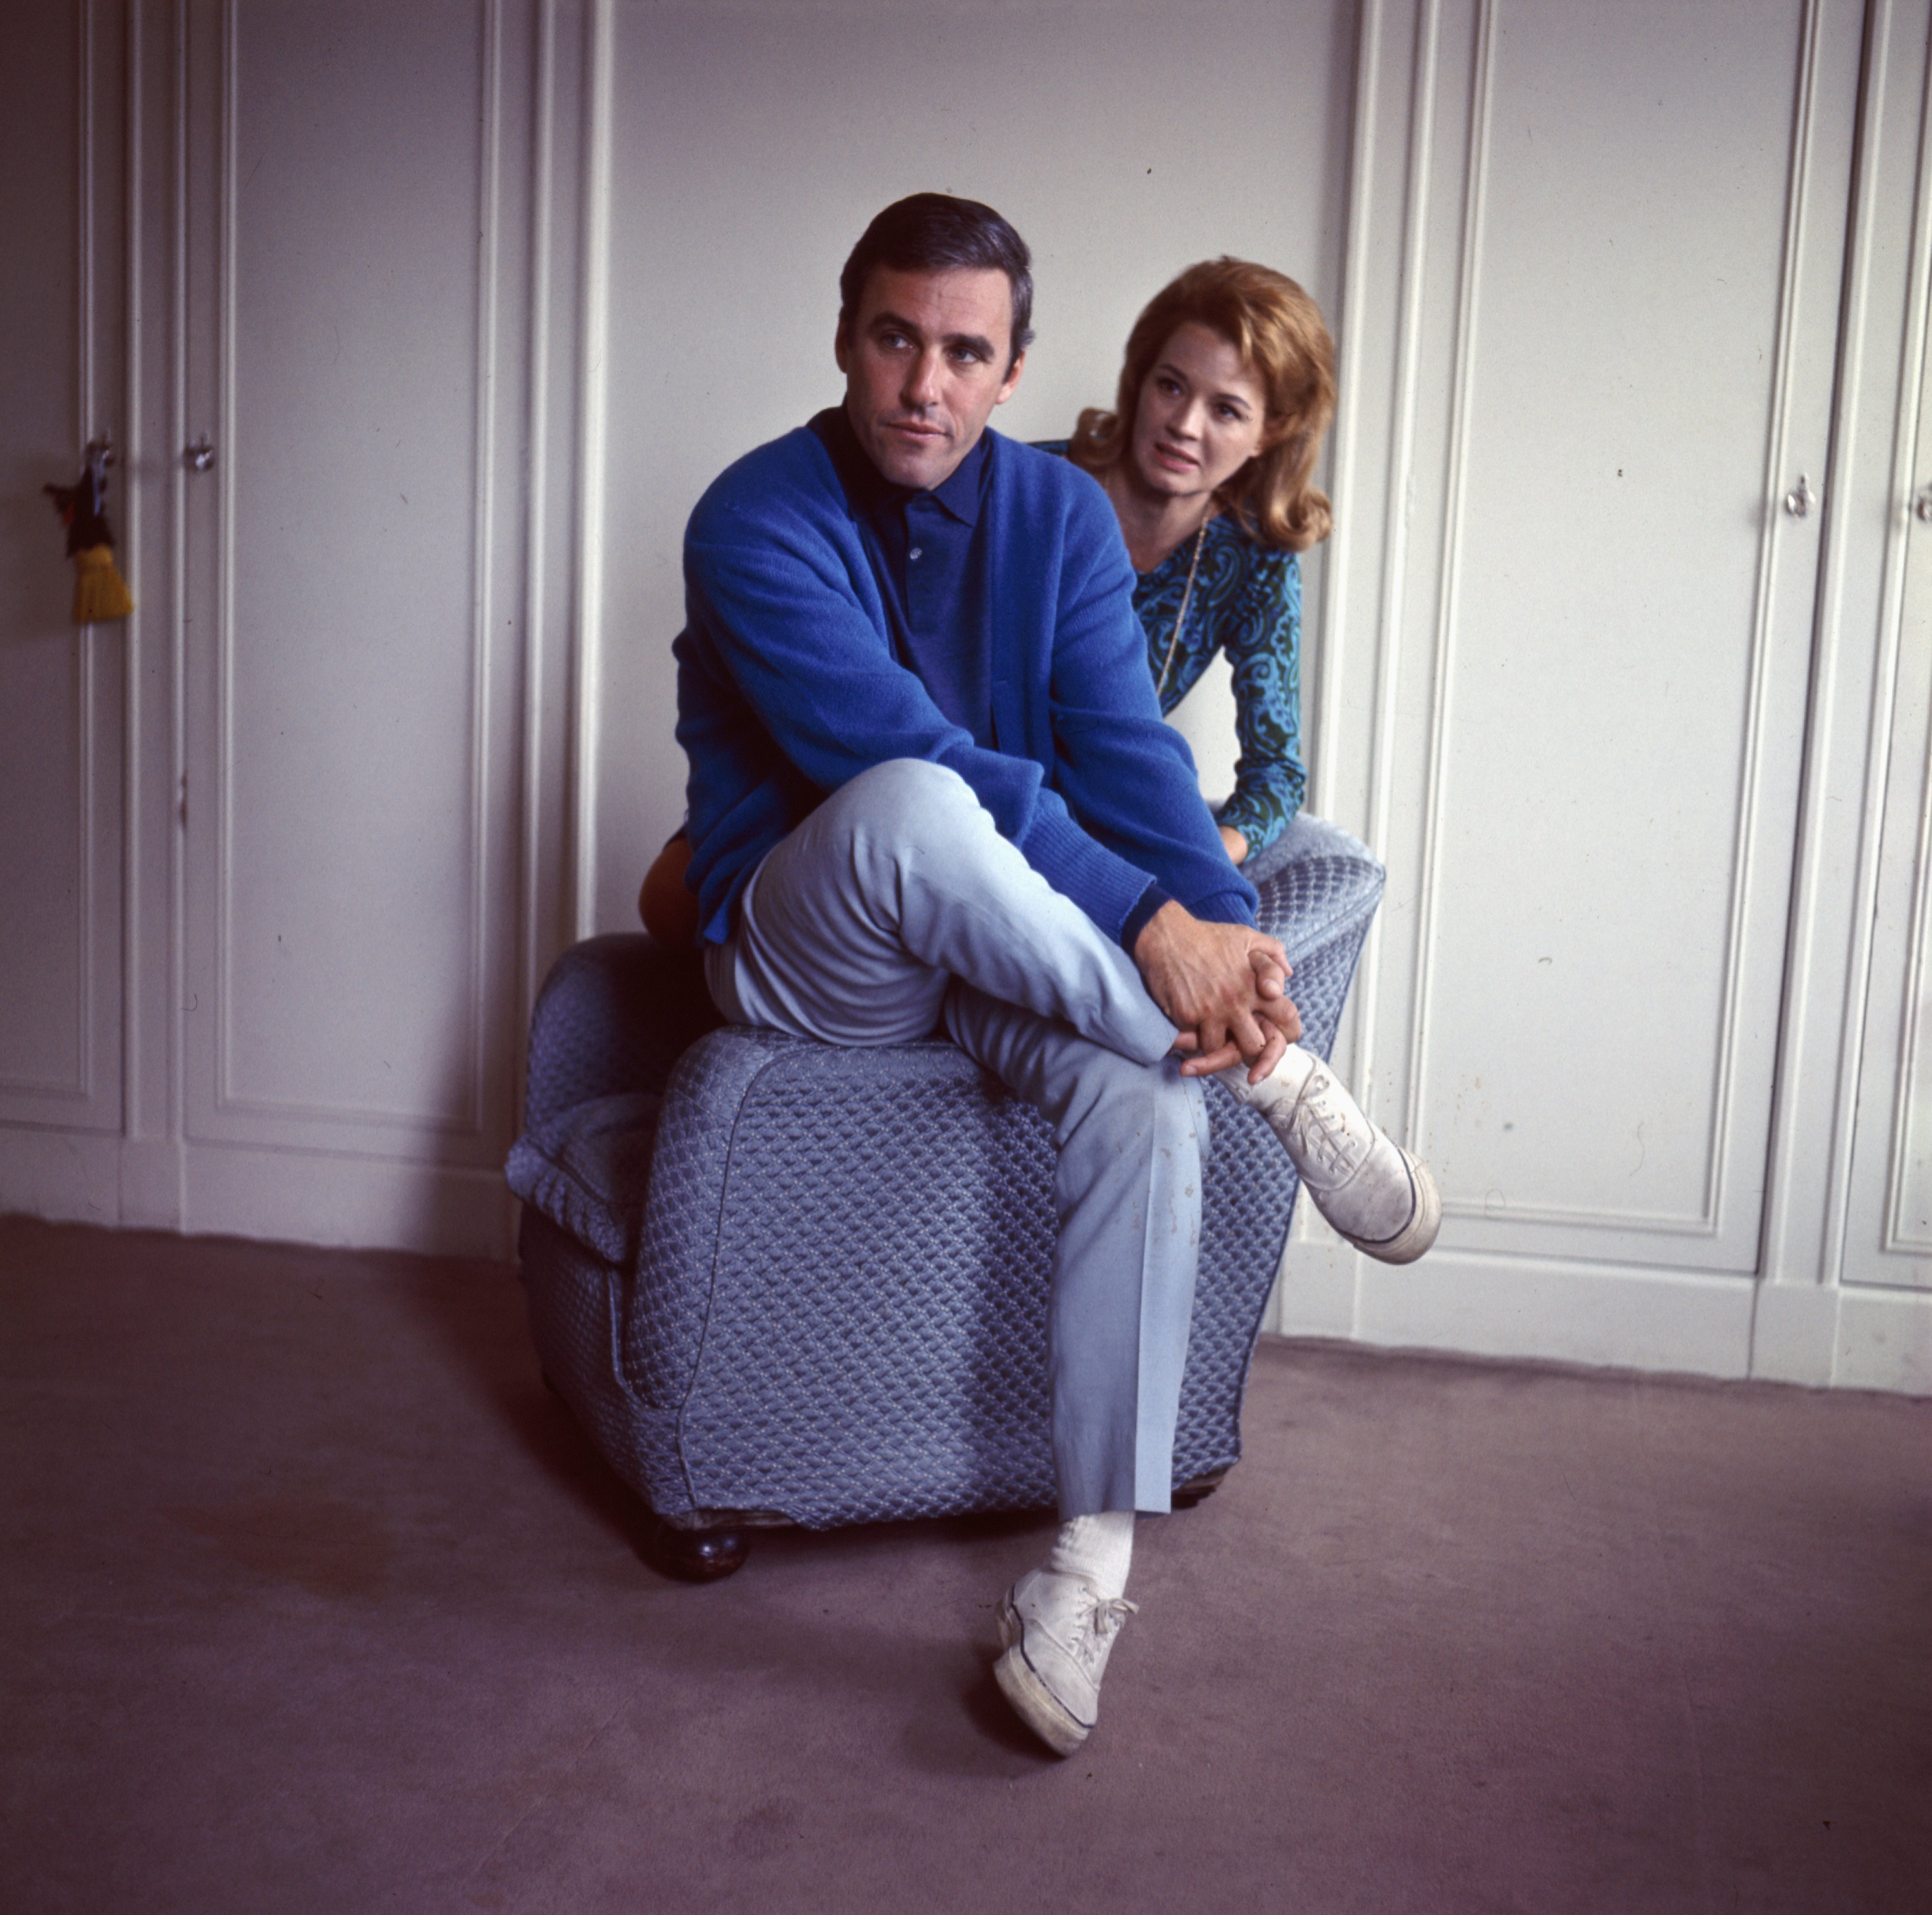 Burt Bacharach and Angie Dickinson in London in 1966 | Source: Getty Images